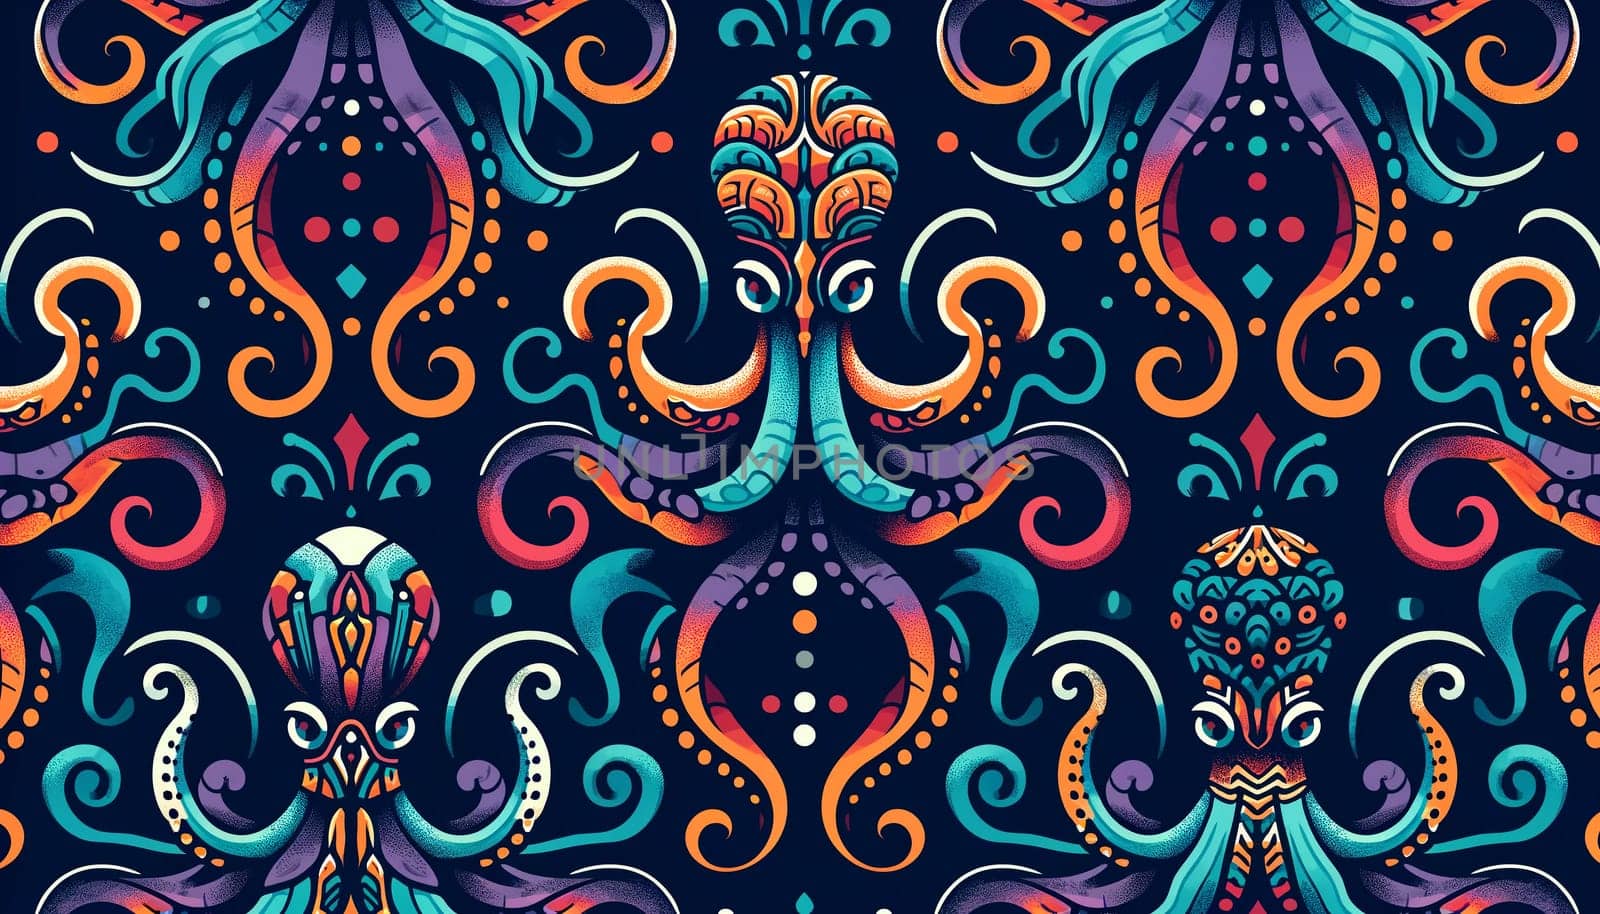 Horizontal pattern with stylized octopuses on a navy background in abstract and geometric shapes by Annado